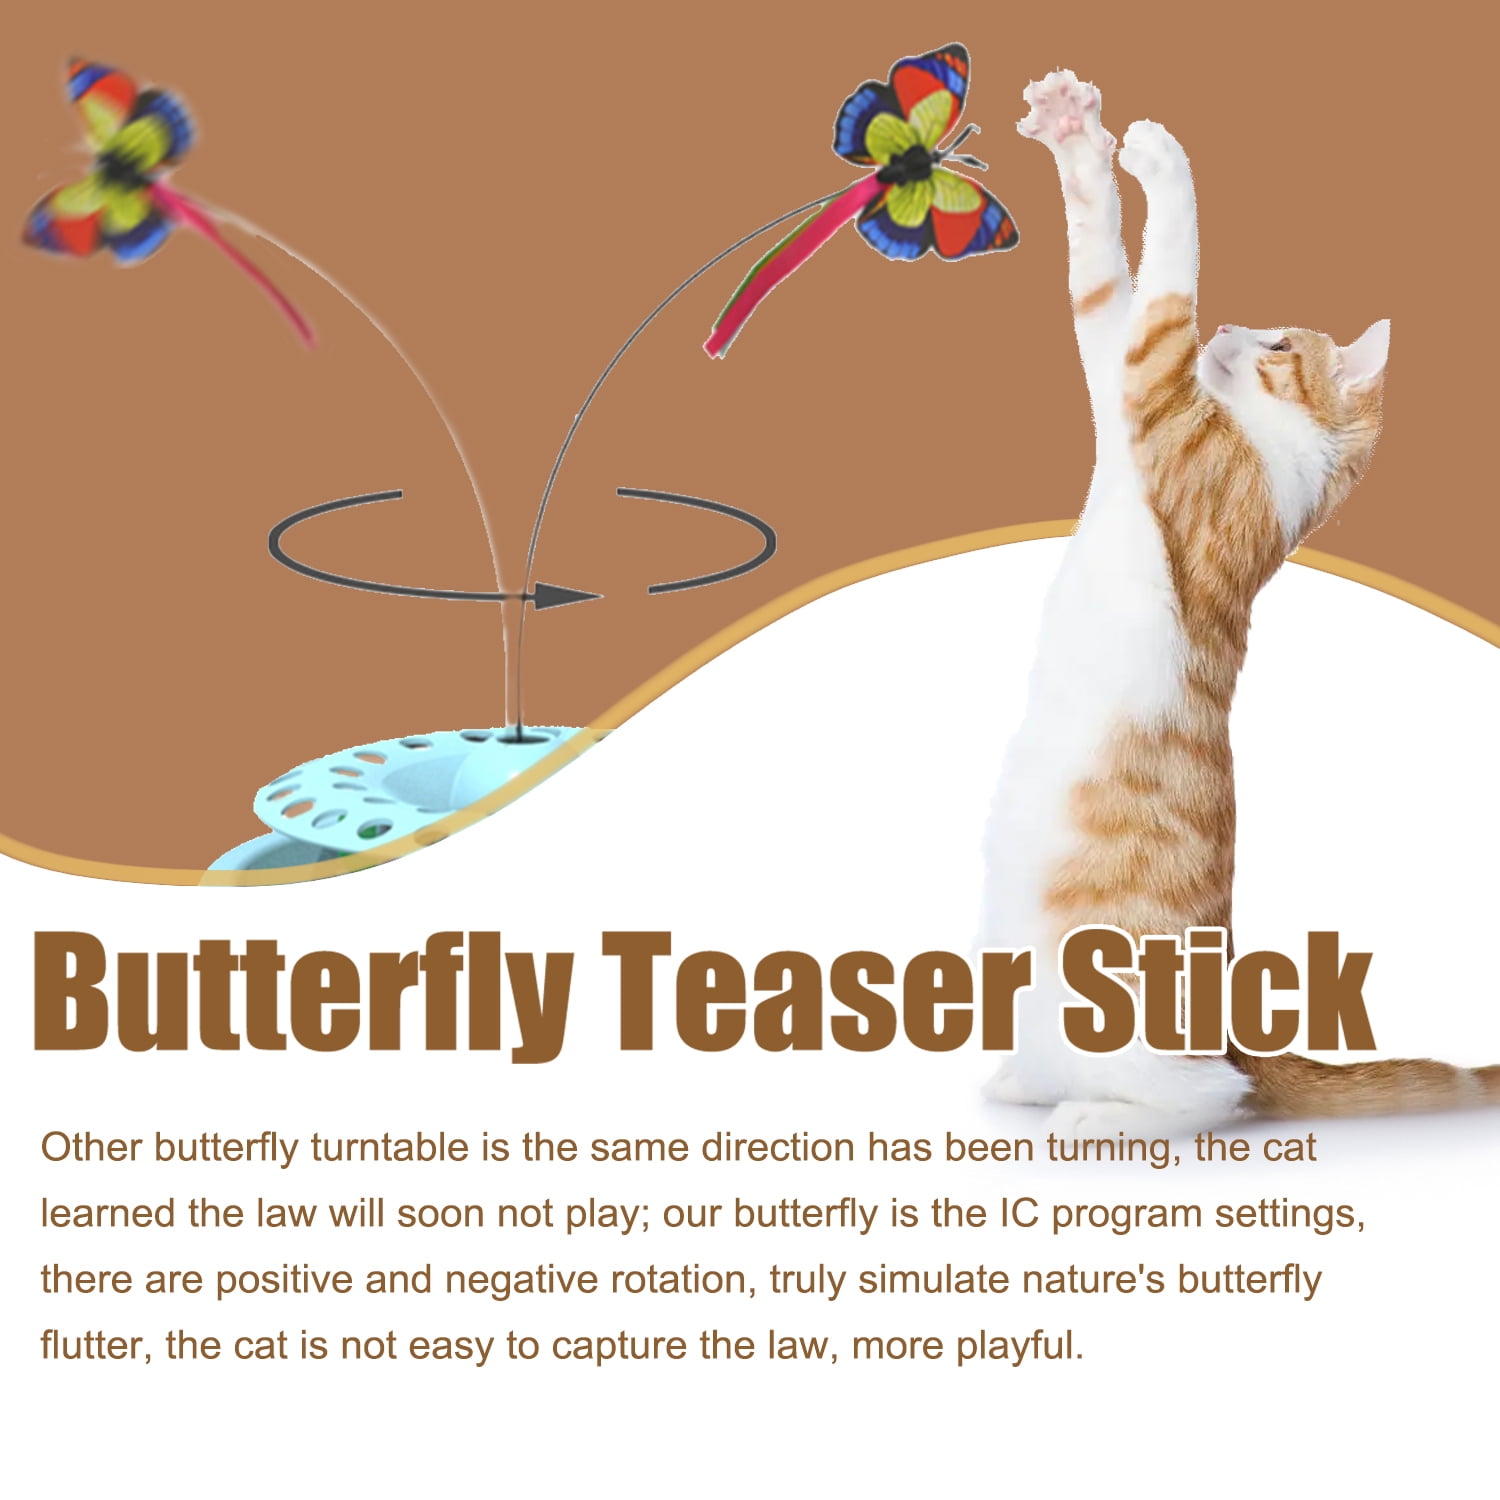 3-in-1 Interactive Cat Toys, Automatic Boredom Relief Kitten Toys 360°  Rotating